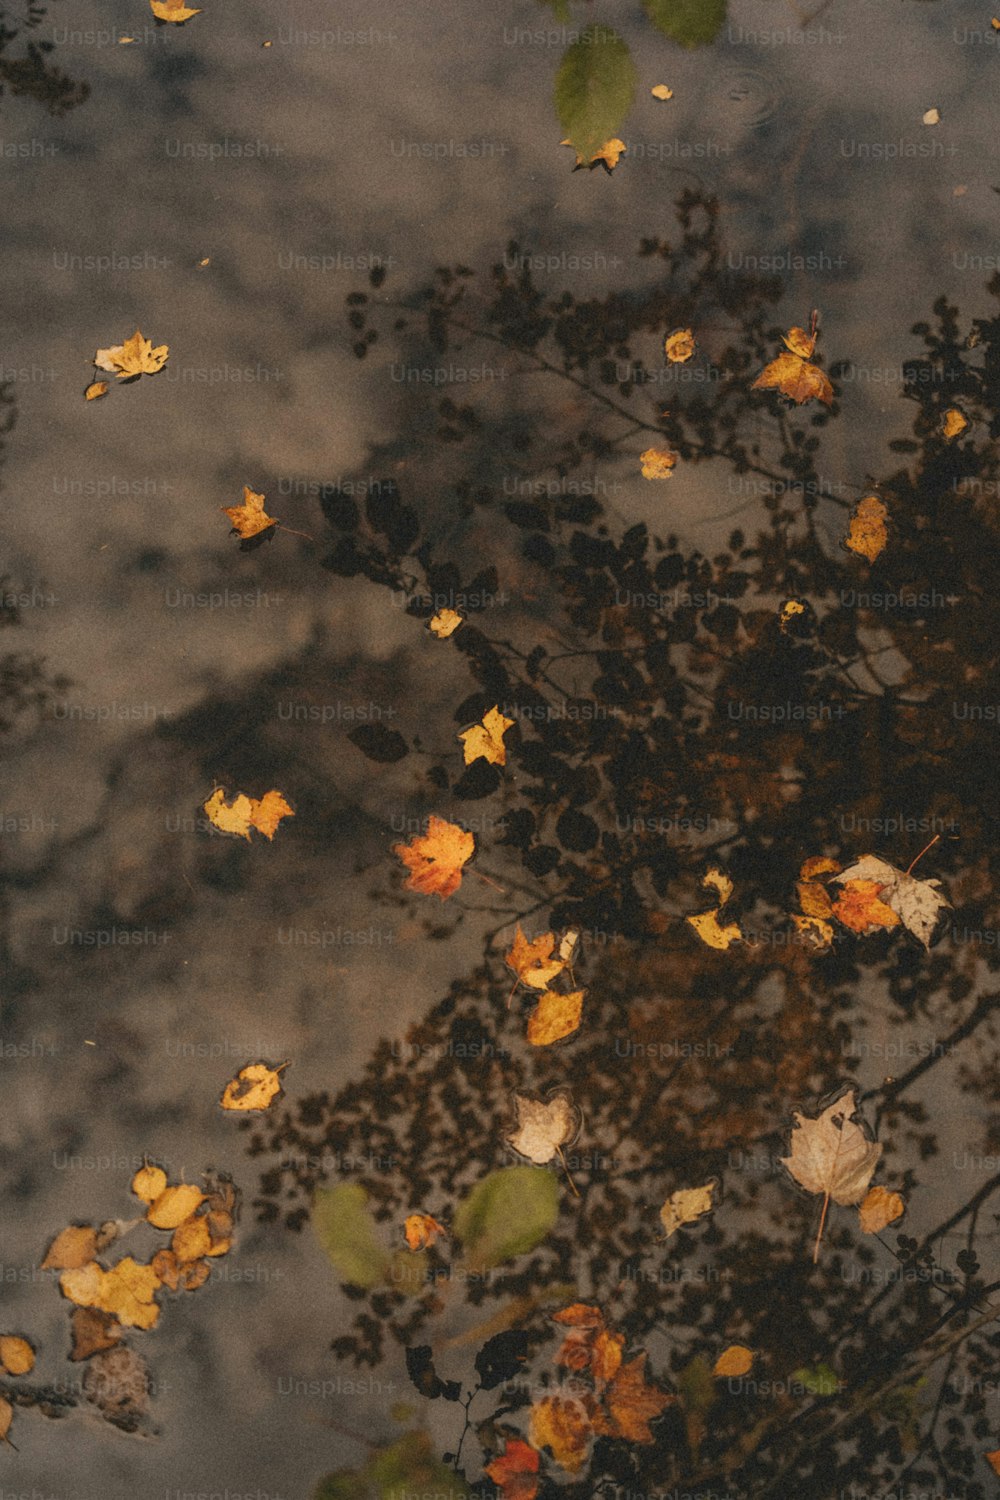 leaves floating in a puddle of water on a cloudy day